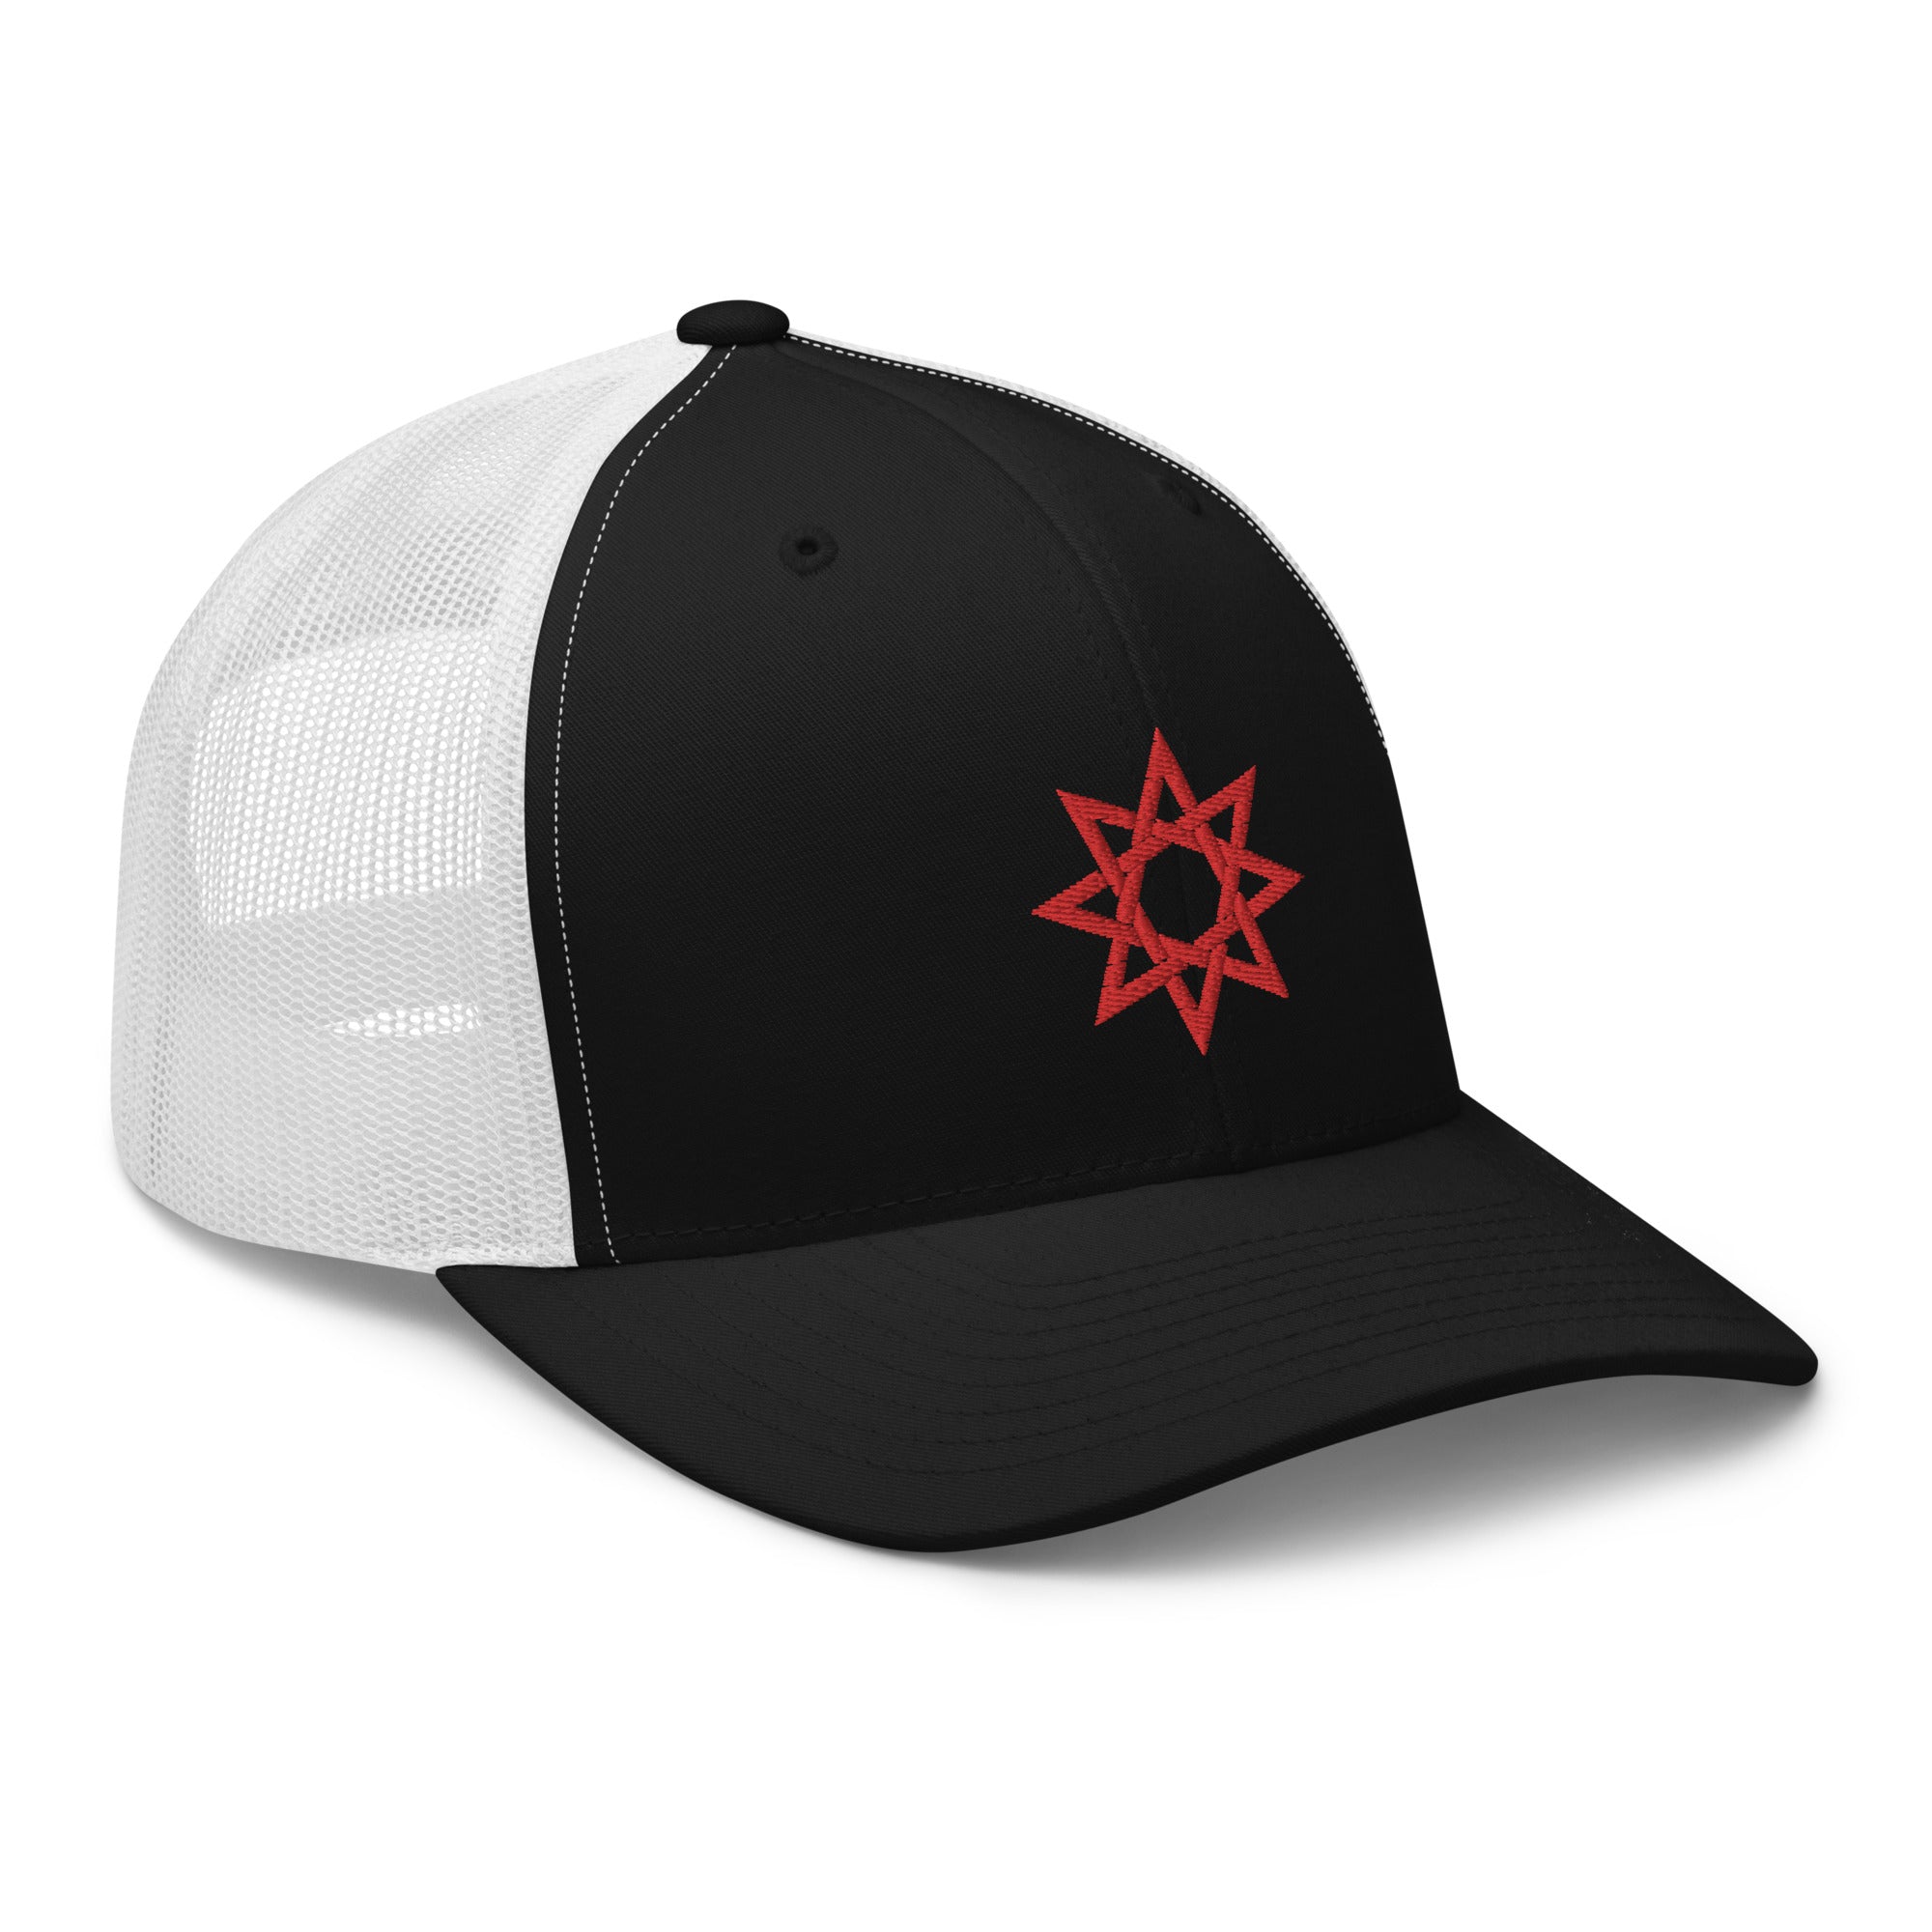 Red 8 Point Star Octagram Anu God Embroidered Retro Trucker Cap Snapback Hat